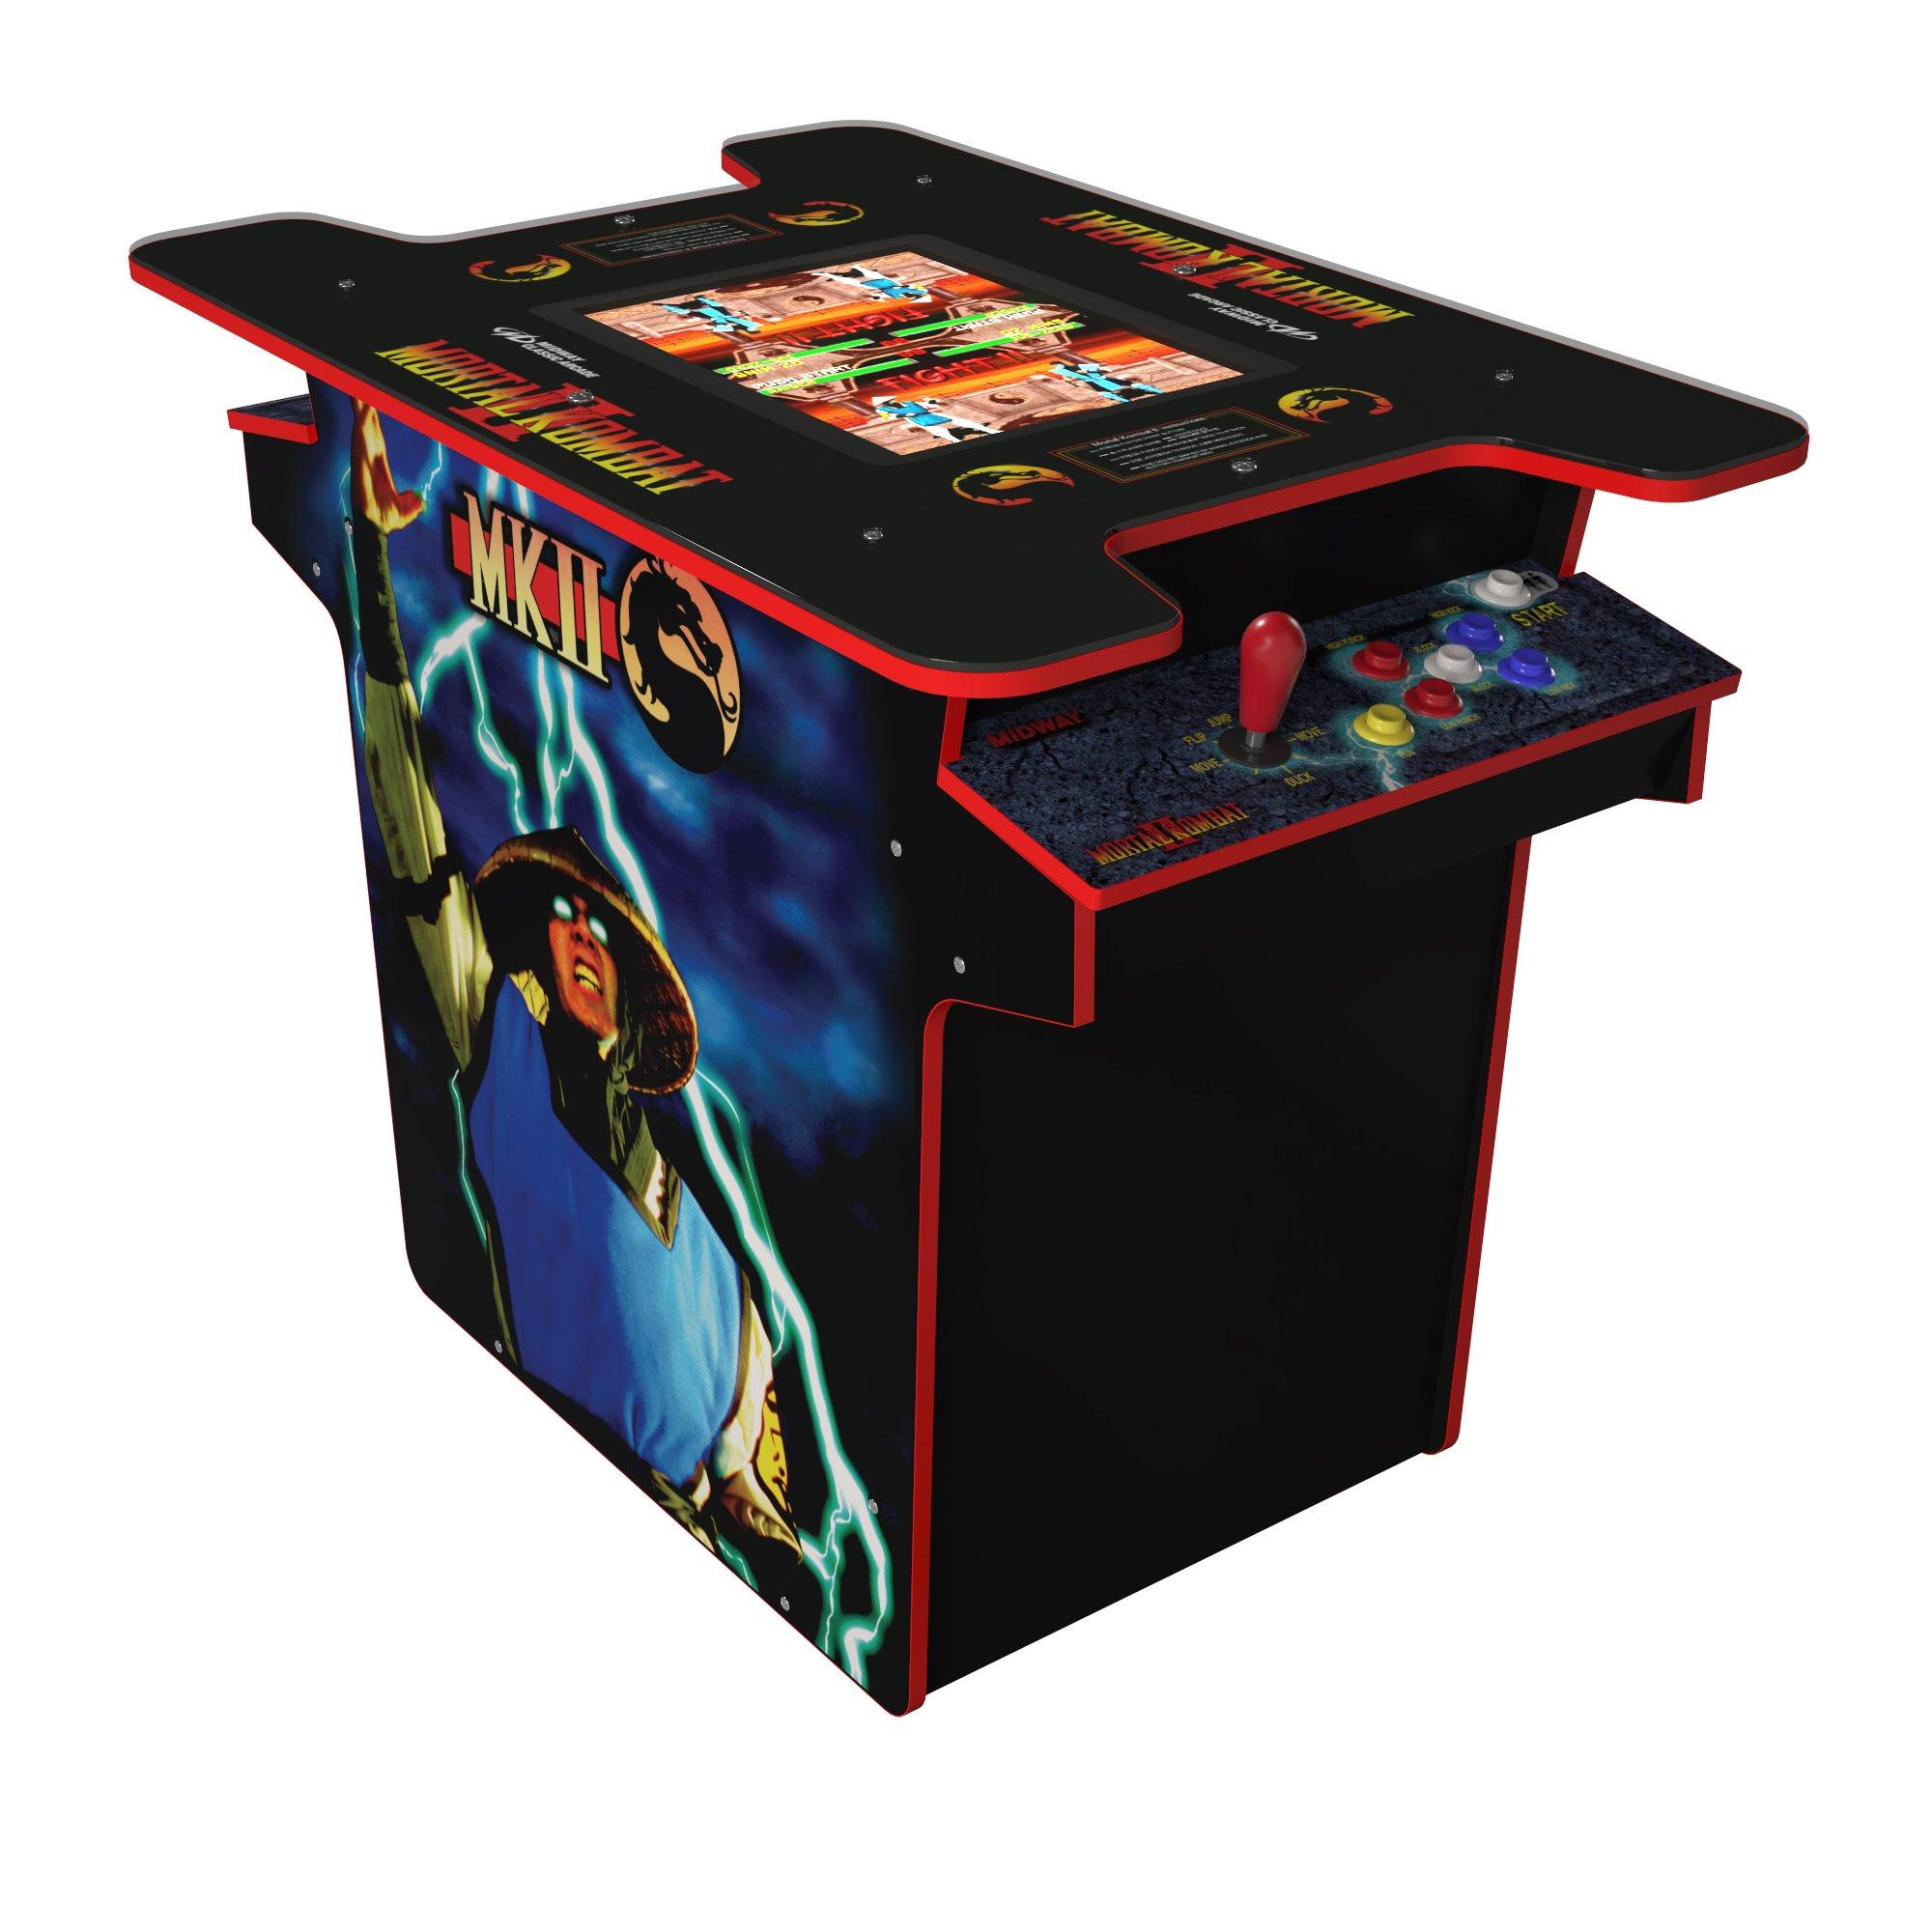 list item 1 of 5 Aracde1Up Mortal Kombat Midway Gaming Table